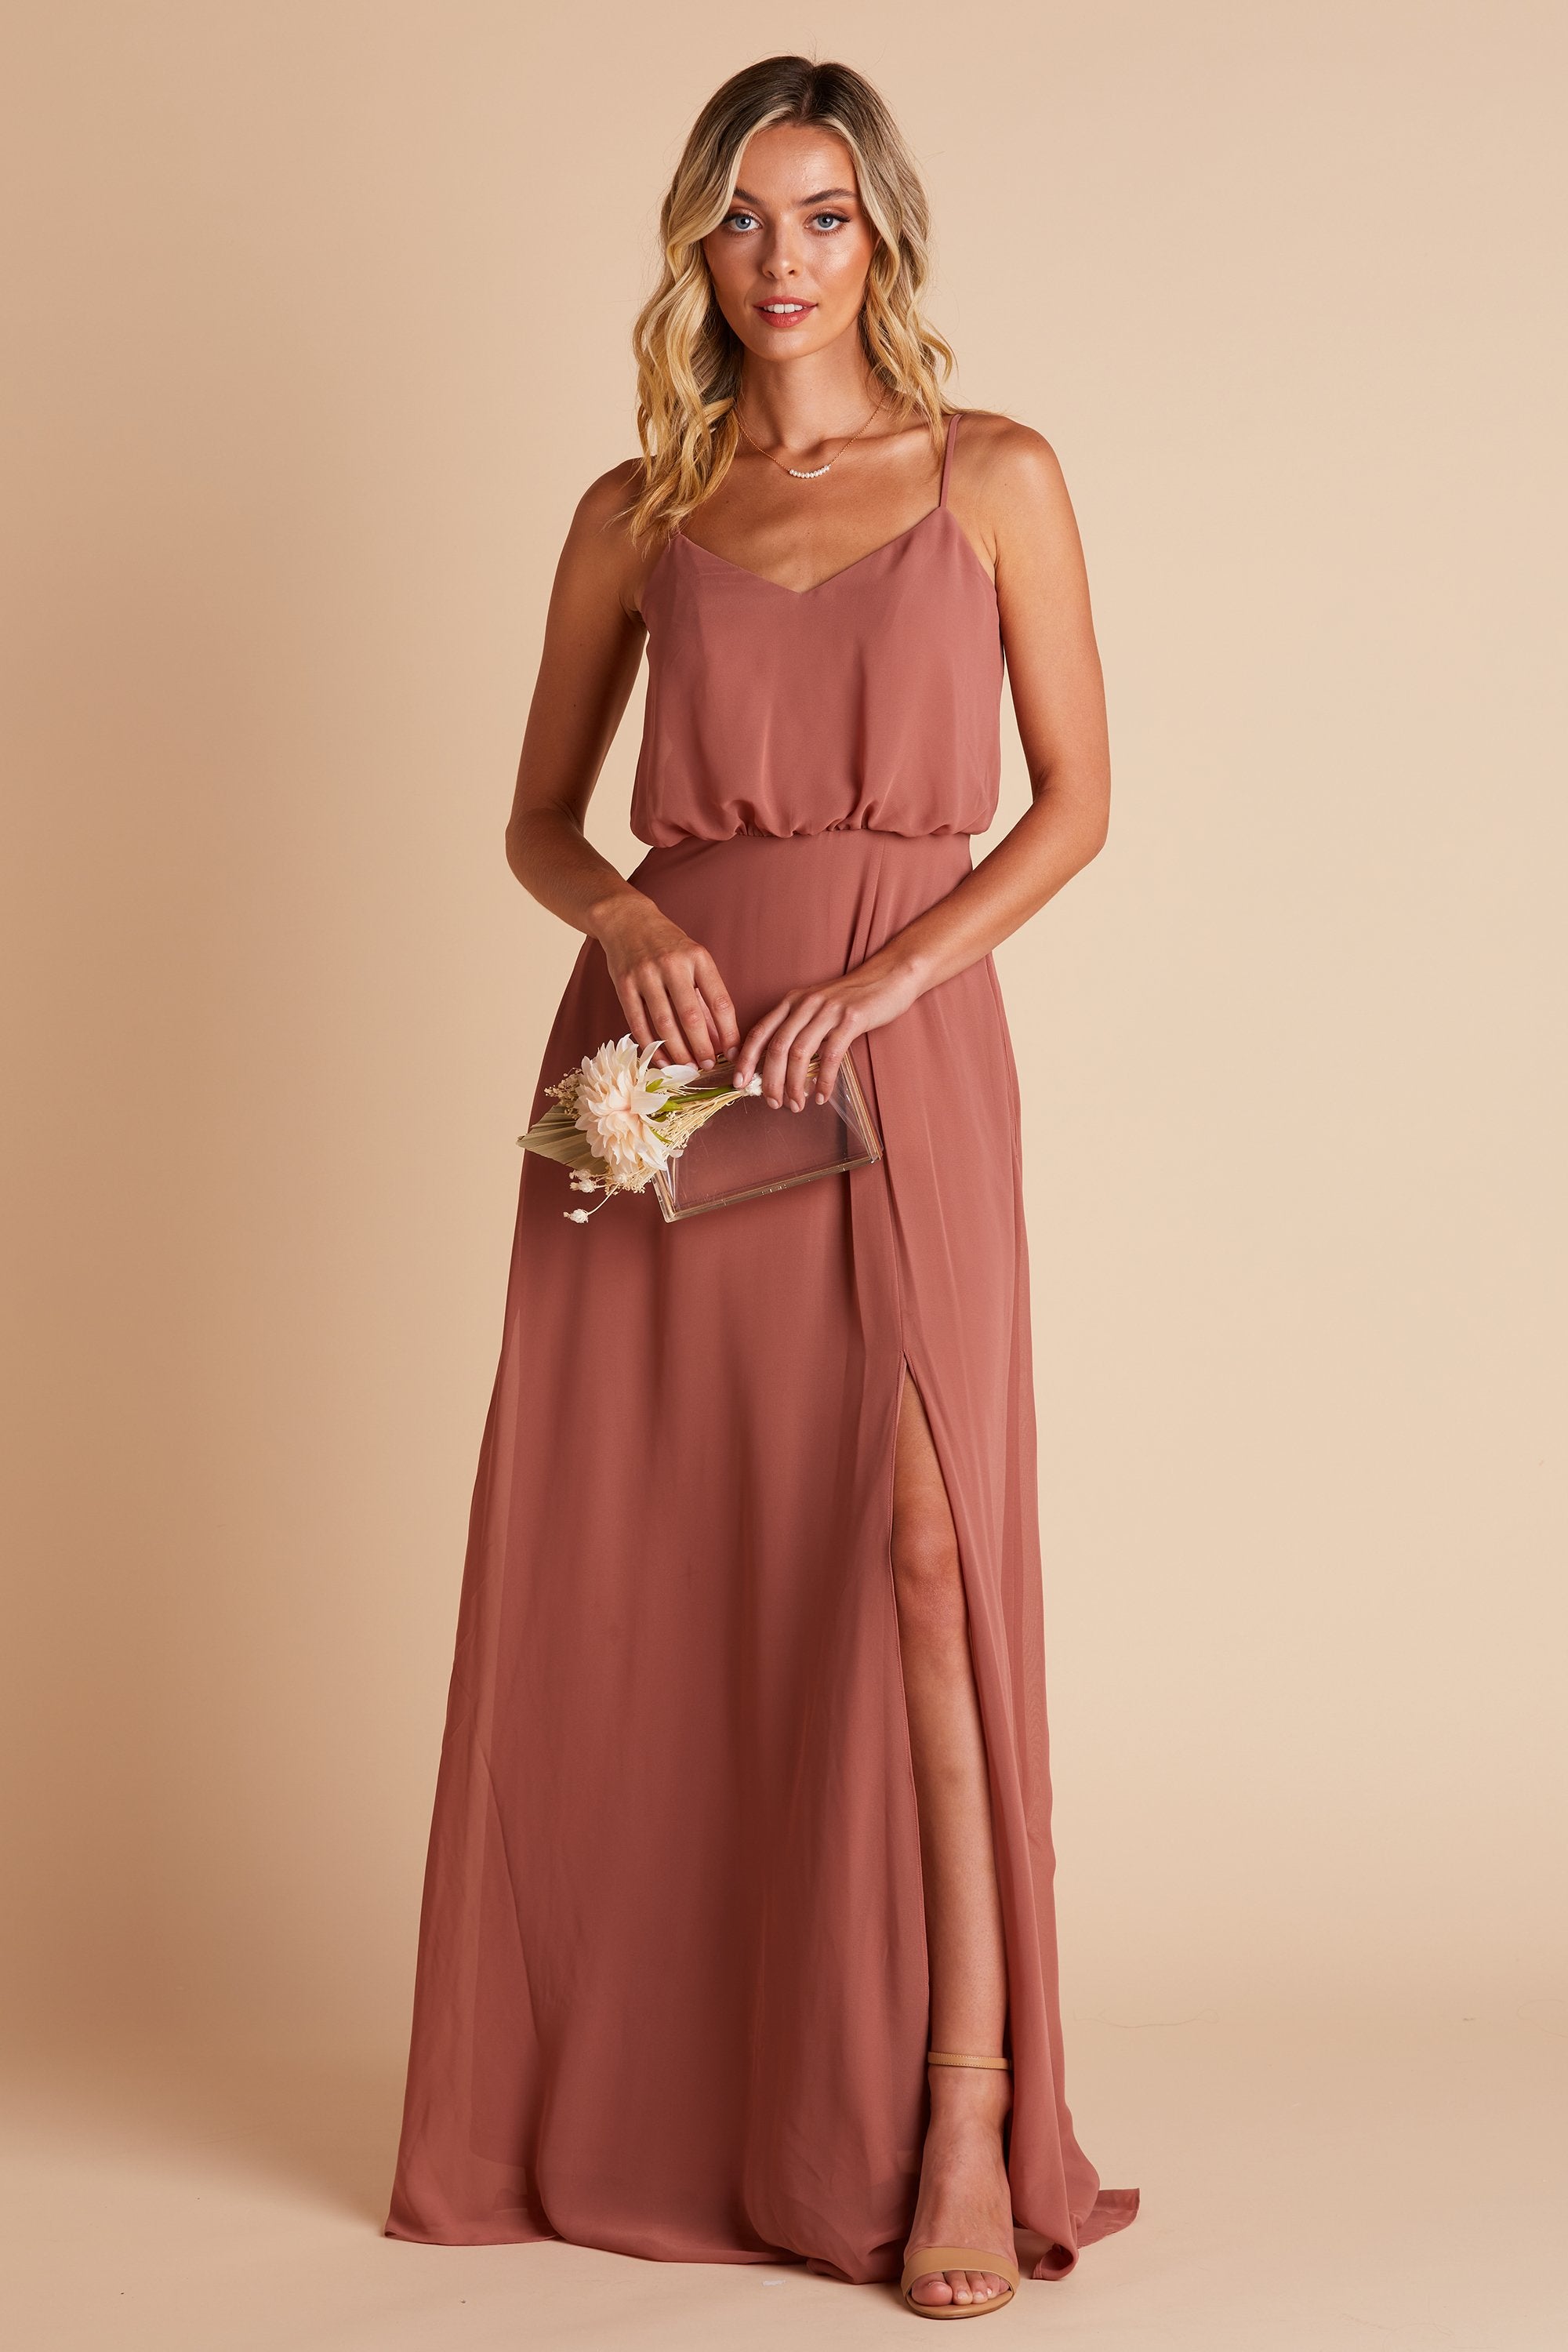 Front view of the Gwennie Dress in desert rose chiffon worn by a slender model with a light skin tone. 